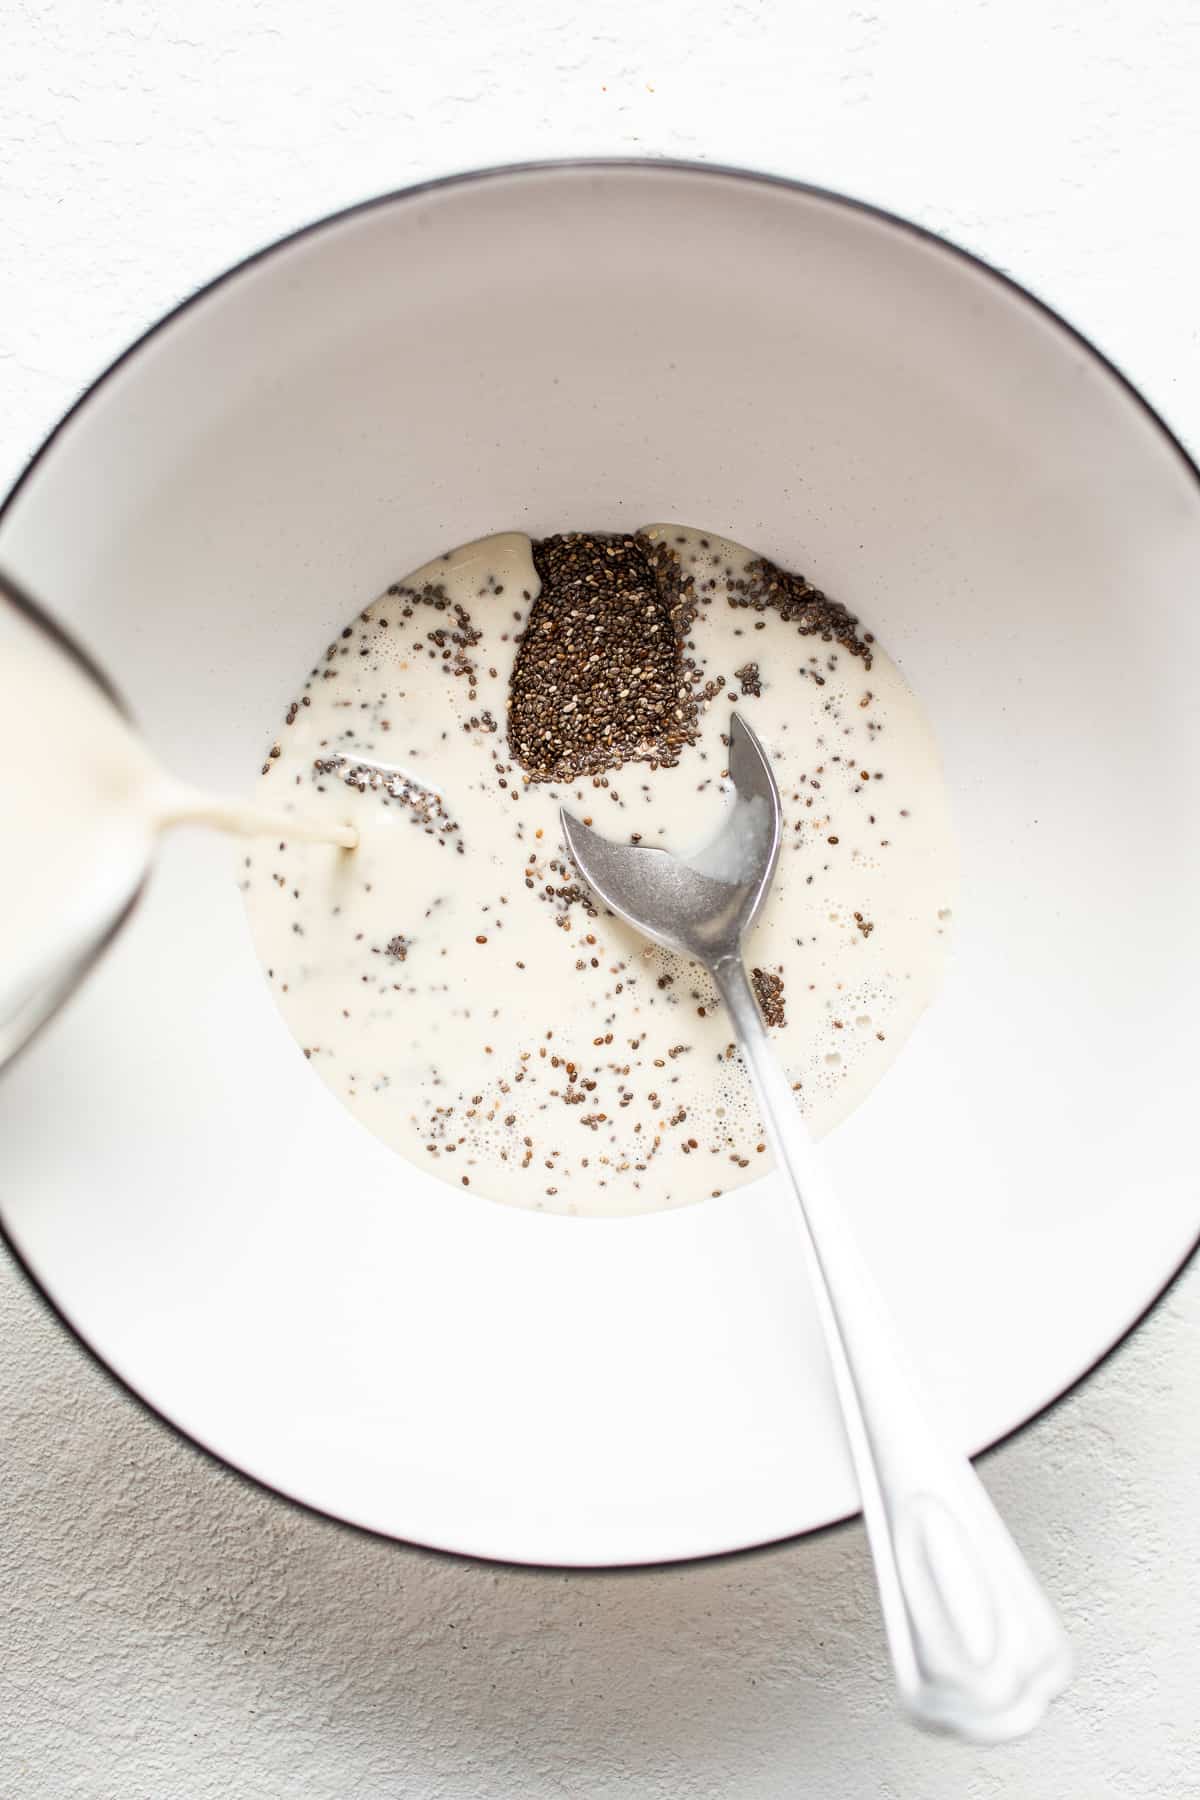 Chia seeds in a bowl with milk.